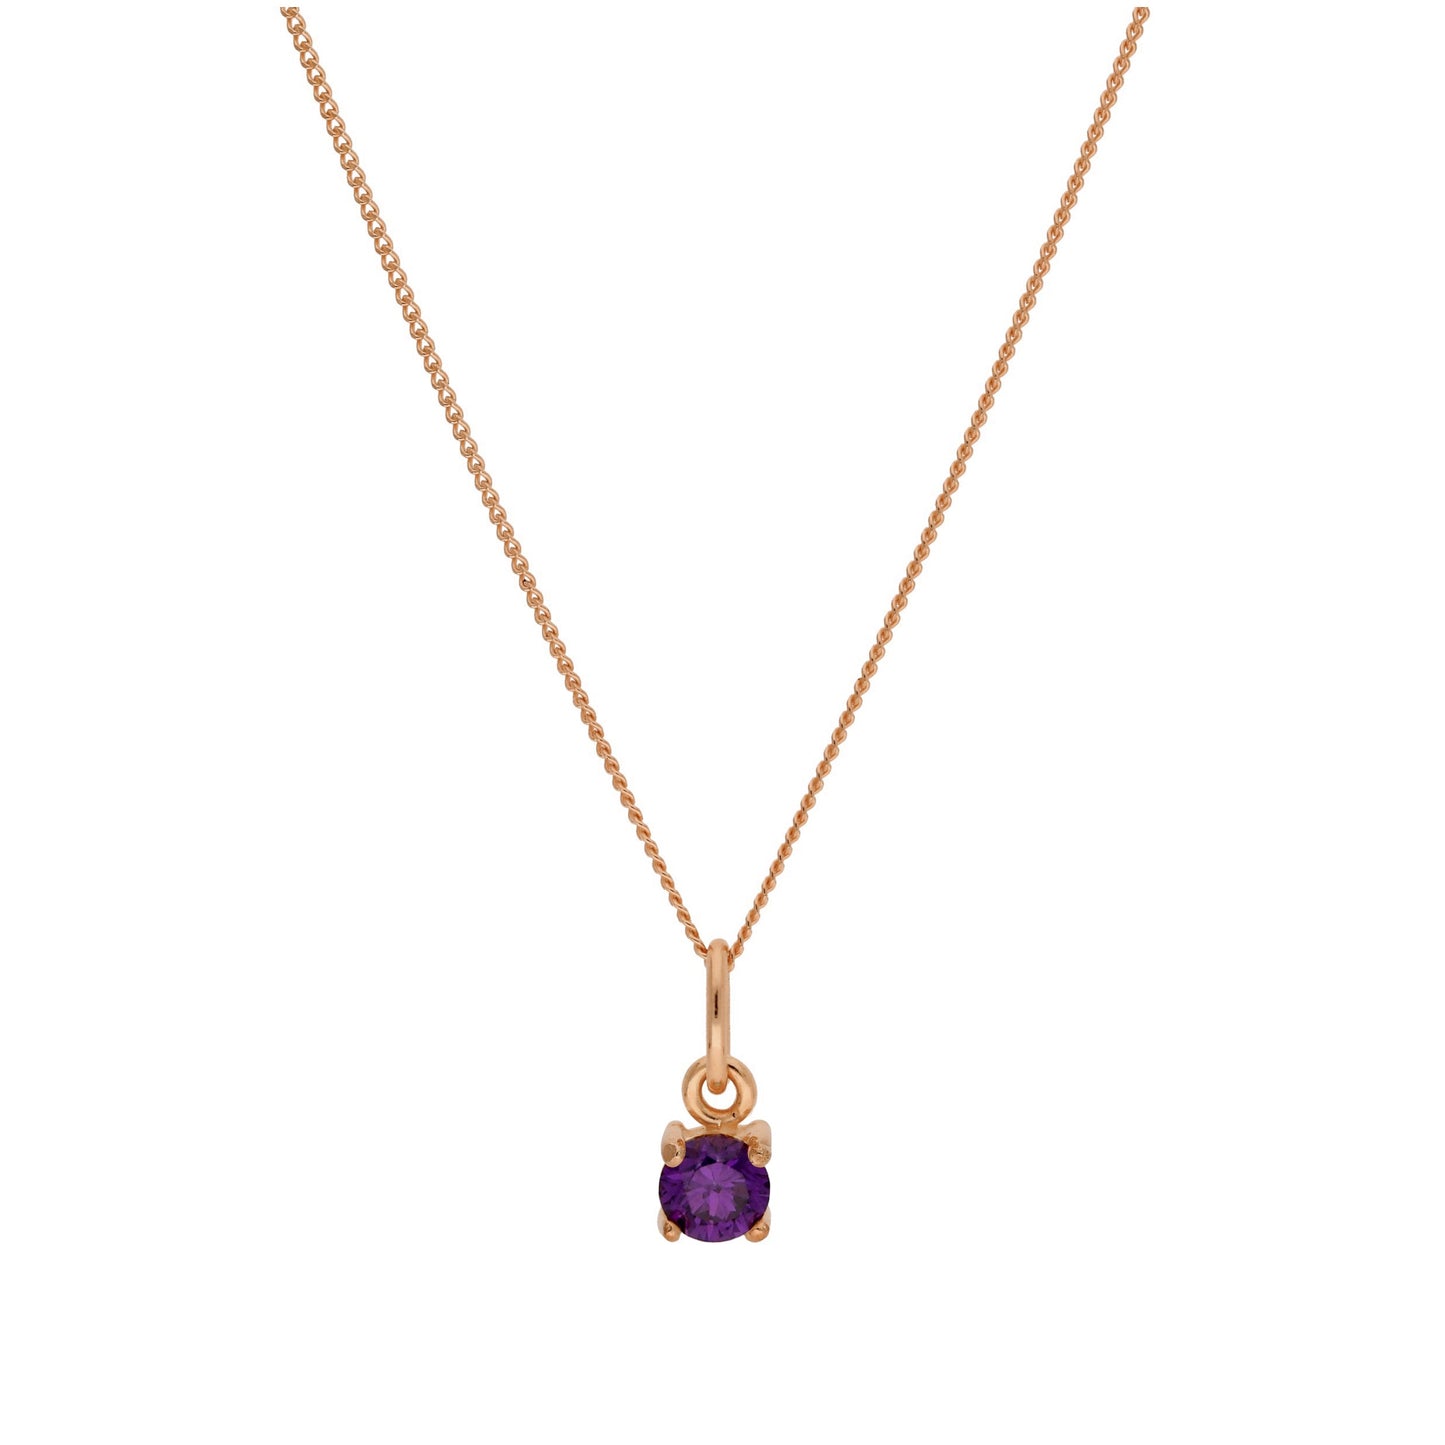 Rose Gold Plated Sterling Silver Amethyst CZ February Necklace 14 - 32 Inches